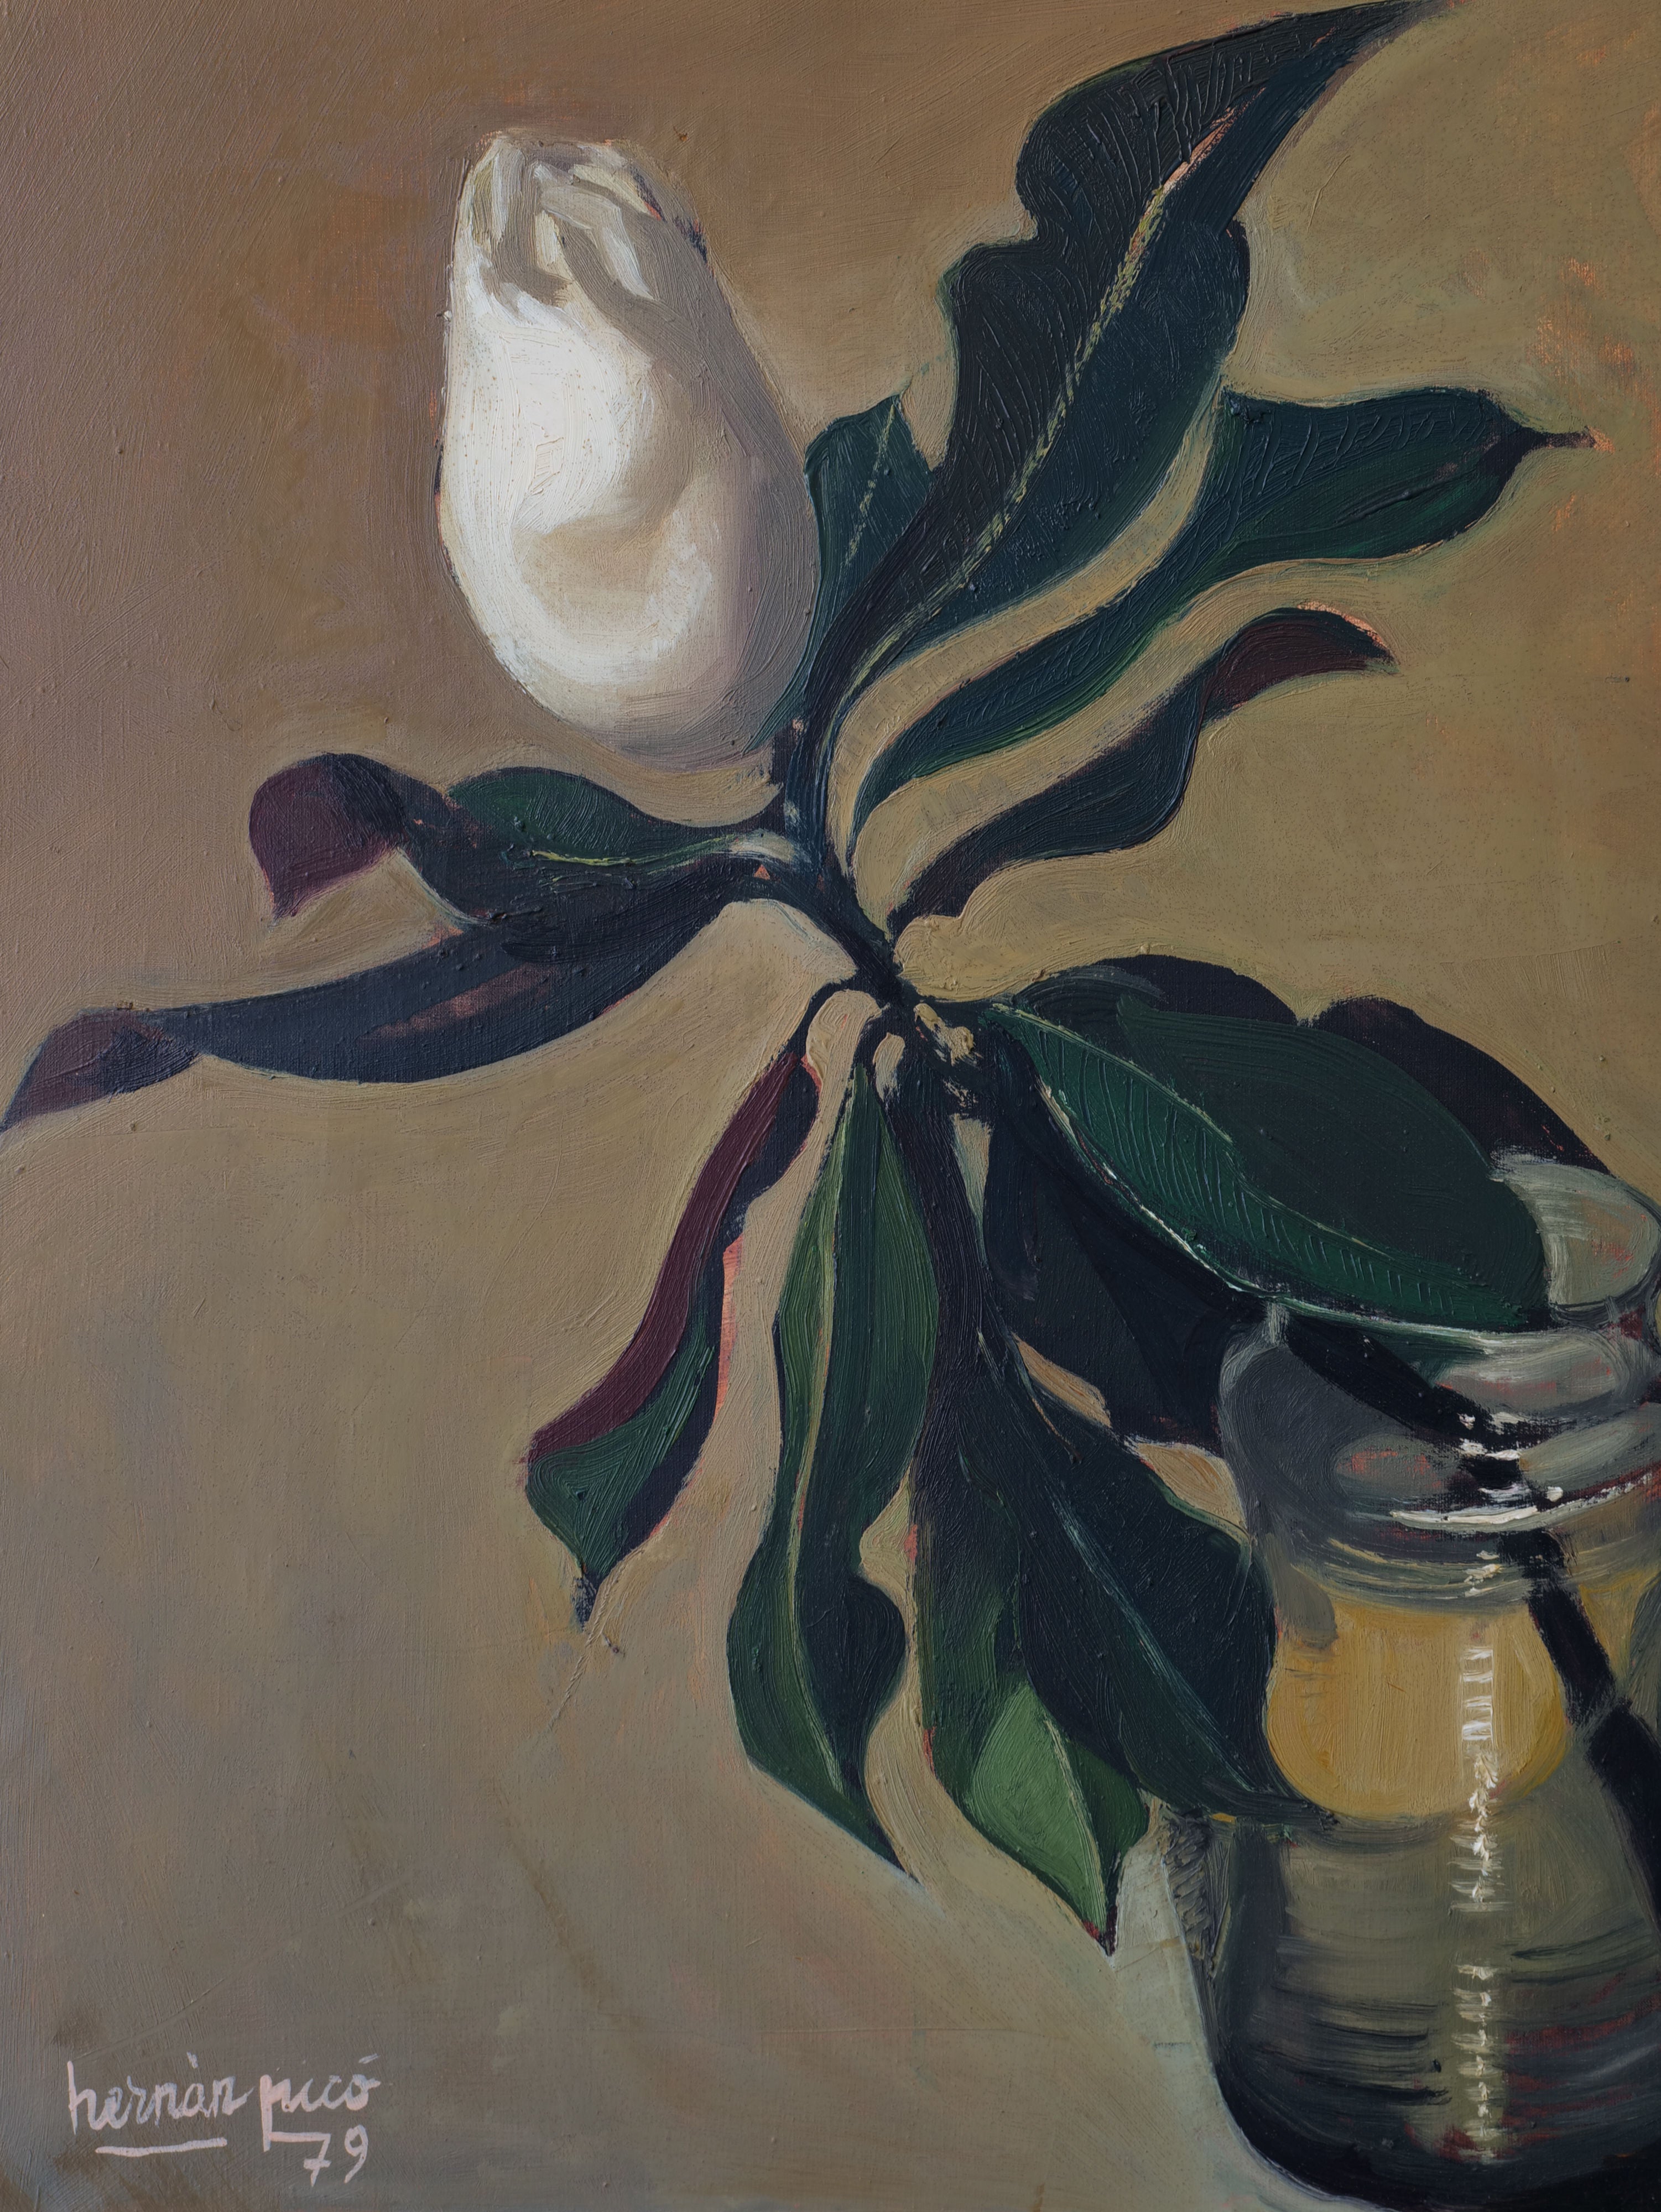 Oil painting on canvas depicting a white Magnolia Grandiflora 1979 flower with a dark green magnolia stem, and part of a glass jar visible, on a beige background. The artist's signature, "Hernán